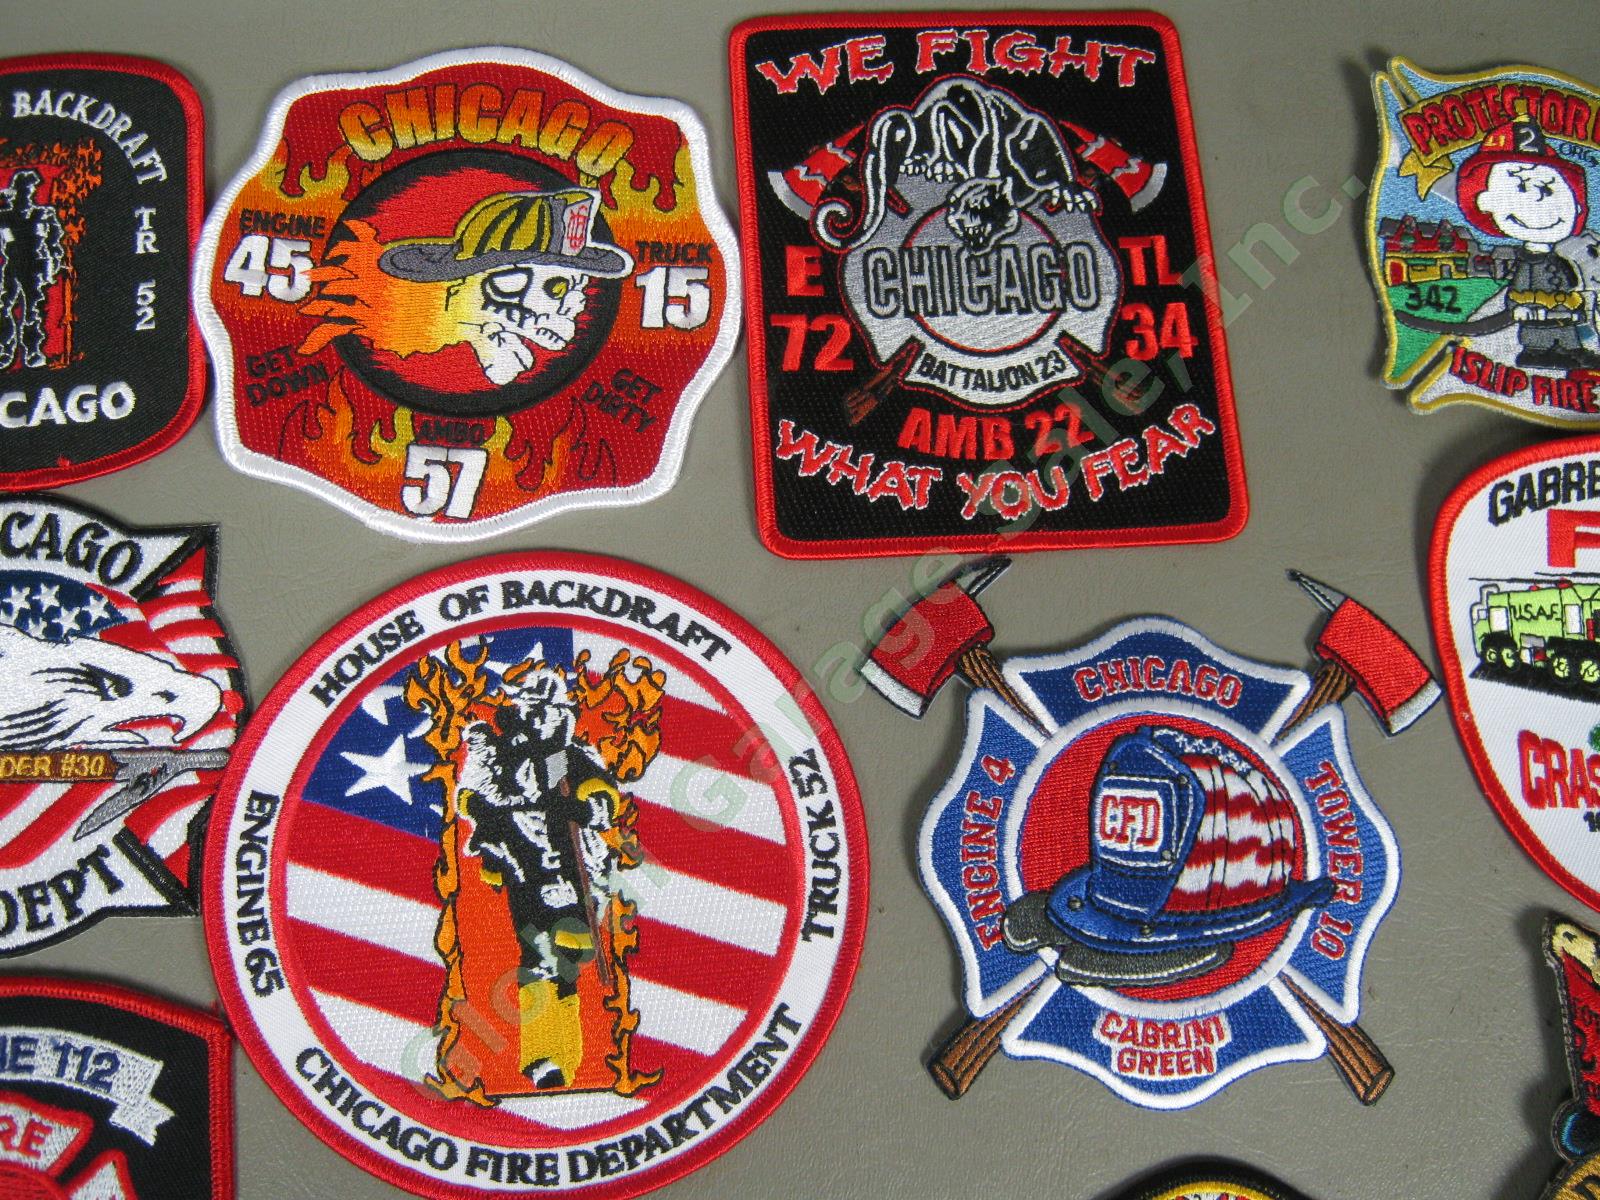 40 New & Used Fire Dept Firefighter Cloth Patch Lot Chicago New York Afghanistan 2